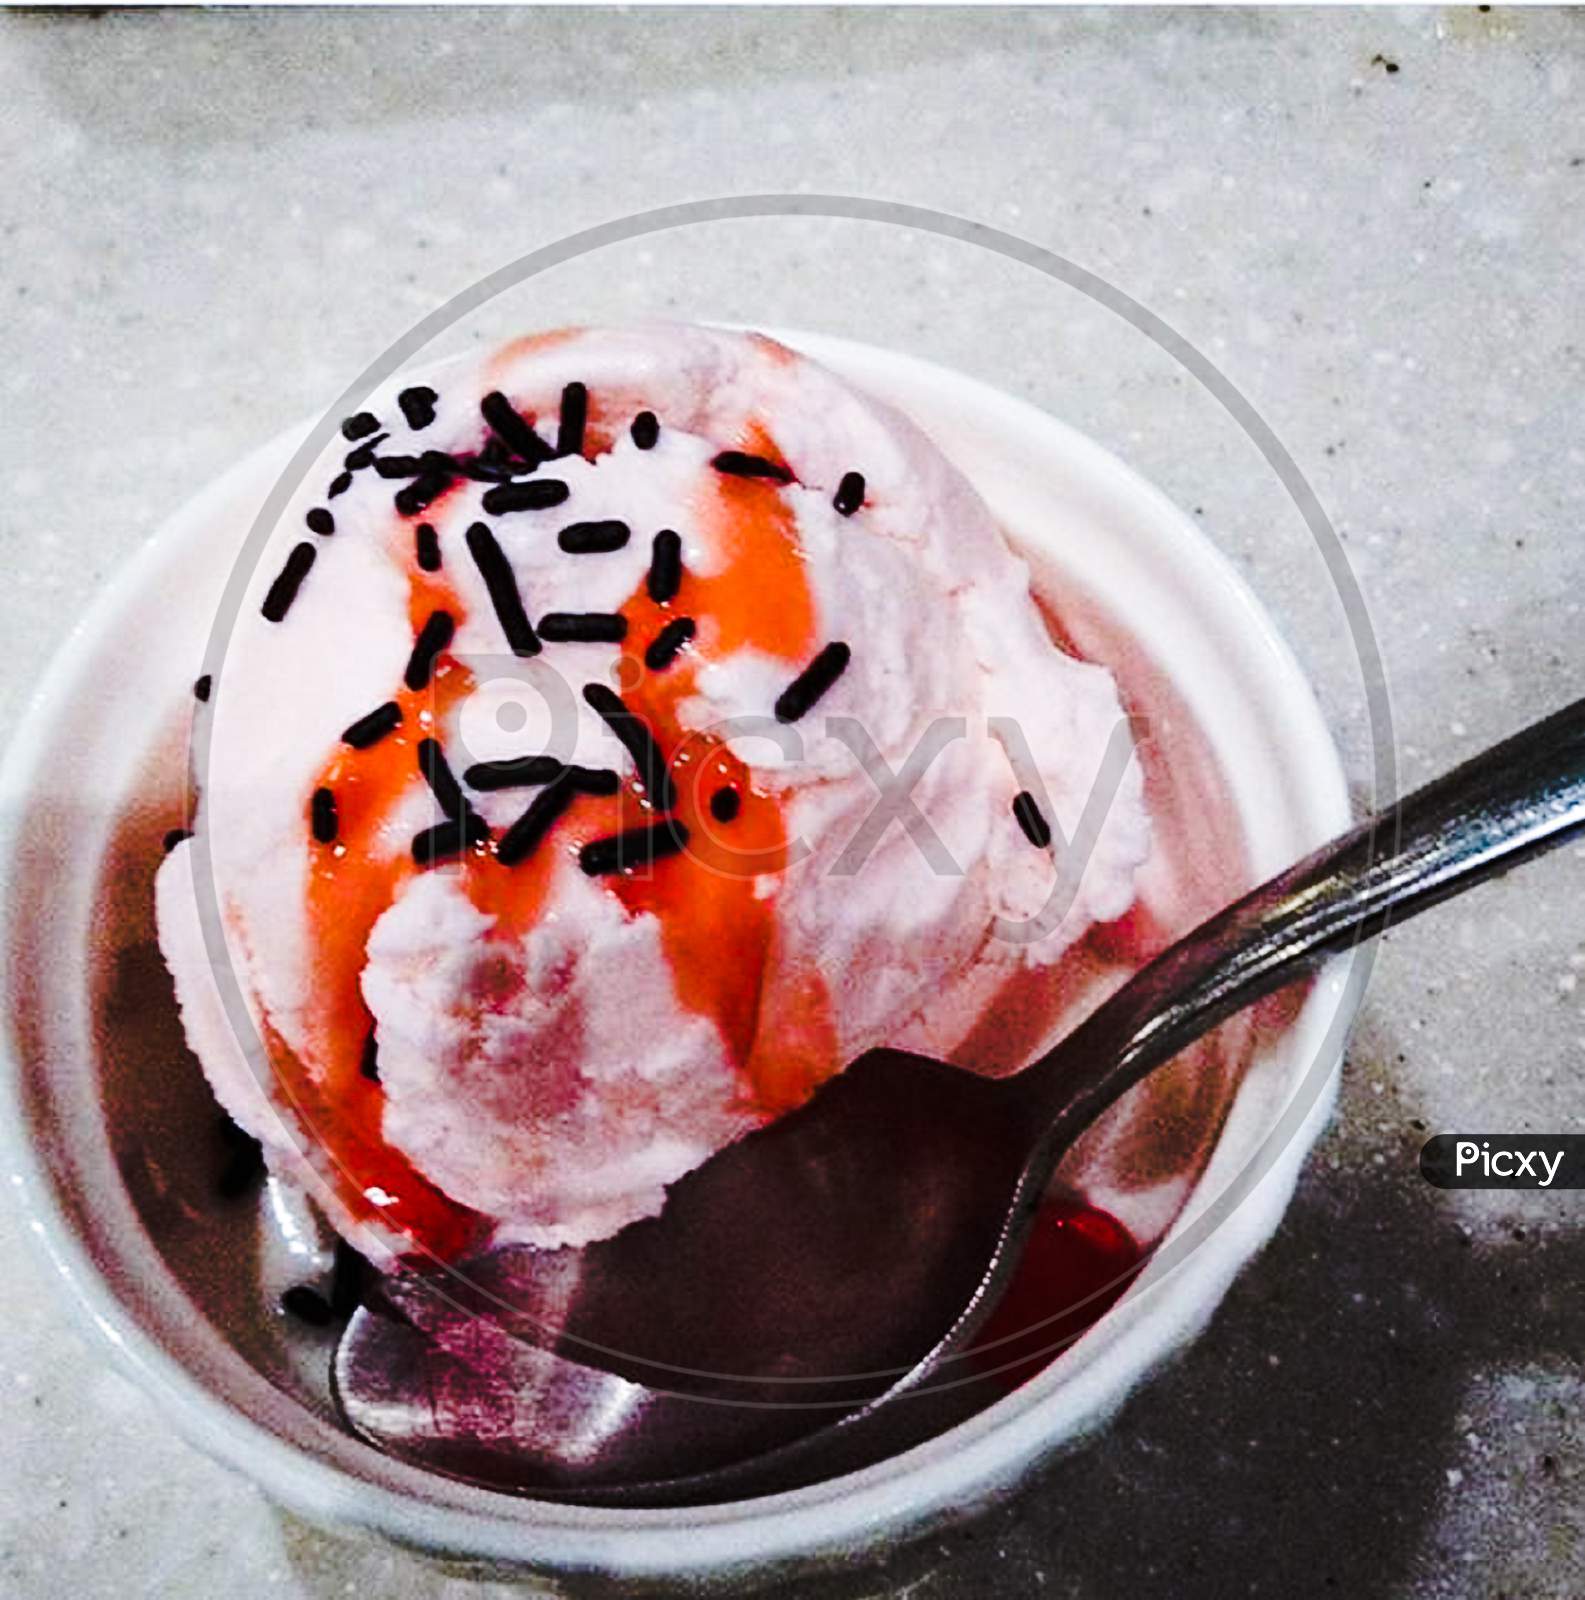 ice cream with sprinkles and cherry sauce